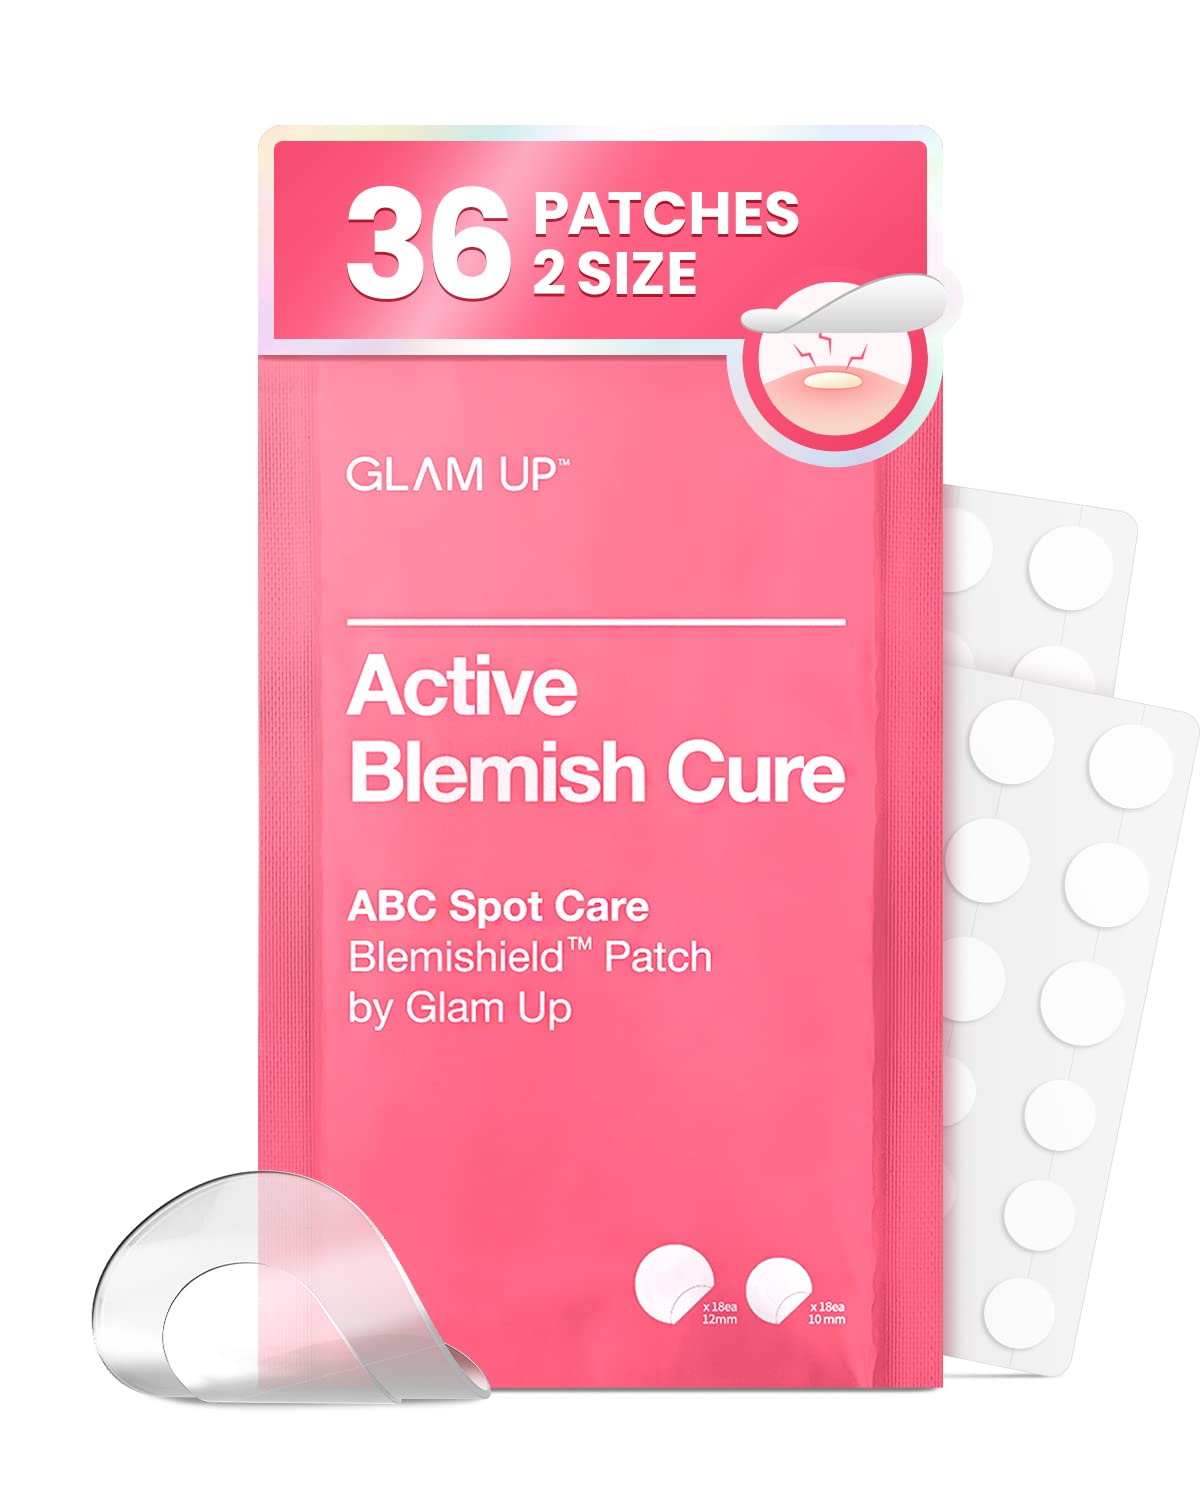 GLAM UP Hydrocolloid Blemish Pimple Zit Patches - Invisible Ultra Thin Spot Cover Stickers for Face and Skin, Strong Water-proof and Adhesive Overnight, Vegan-friendly (36 Count / 2 Sizes)